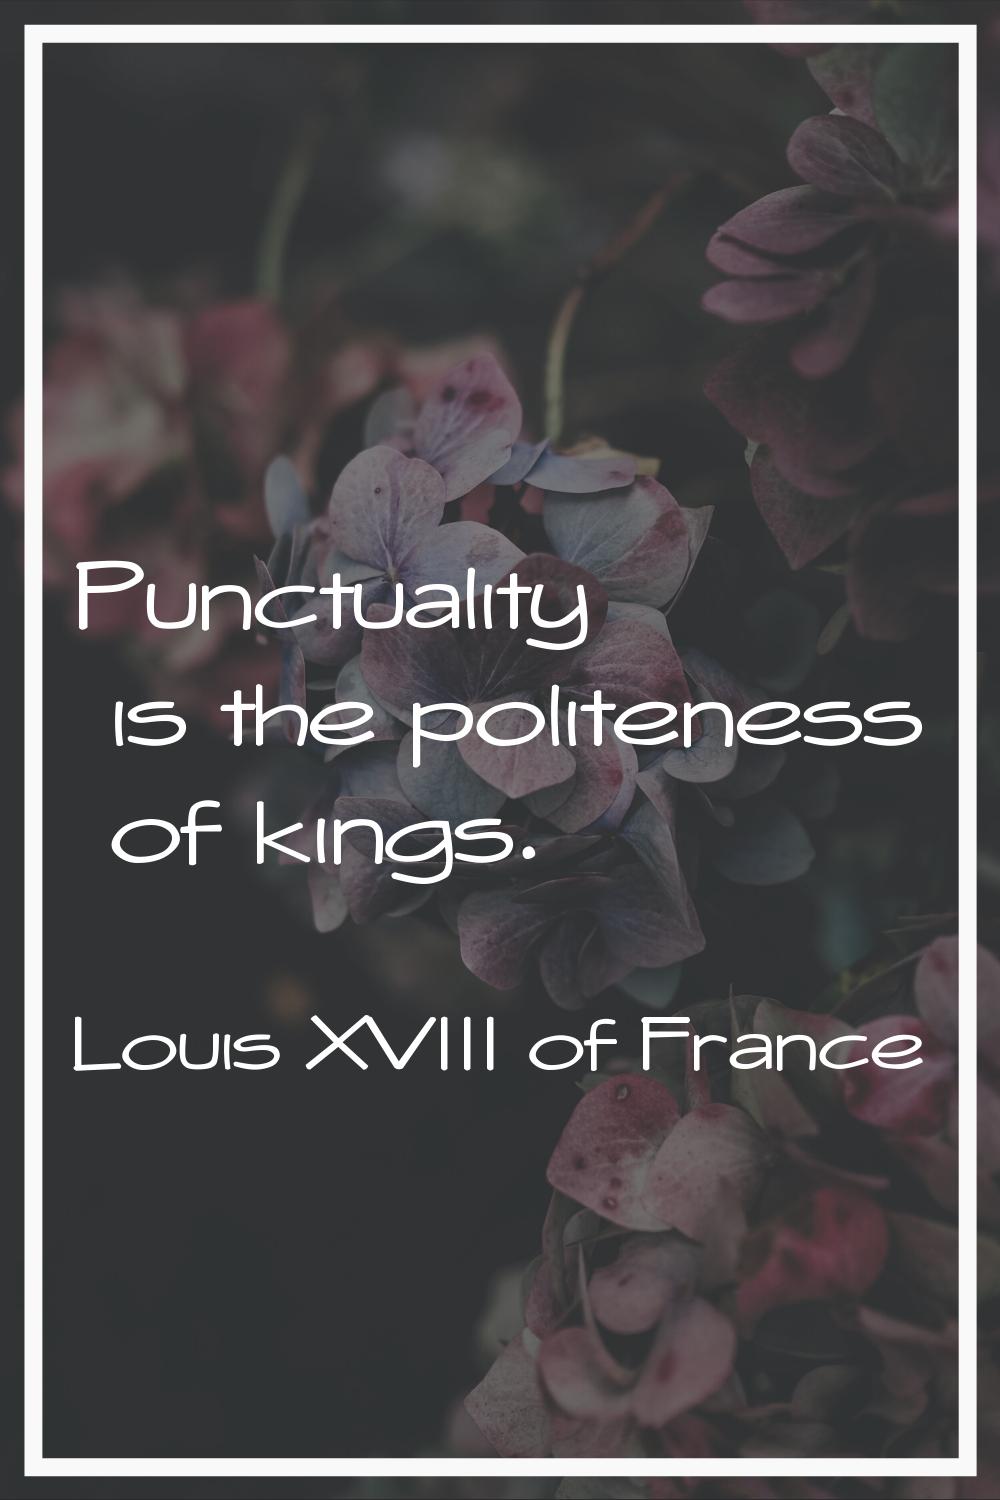 Punctuality is the politeness of kings.